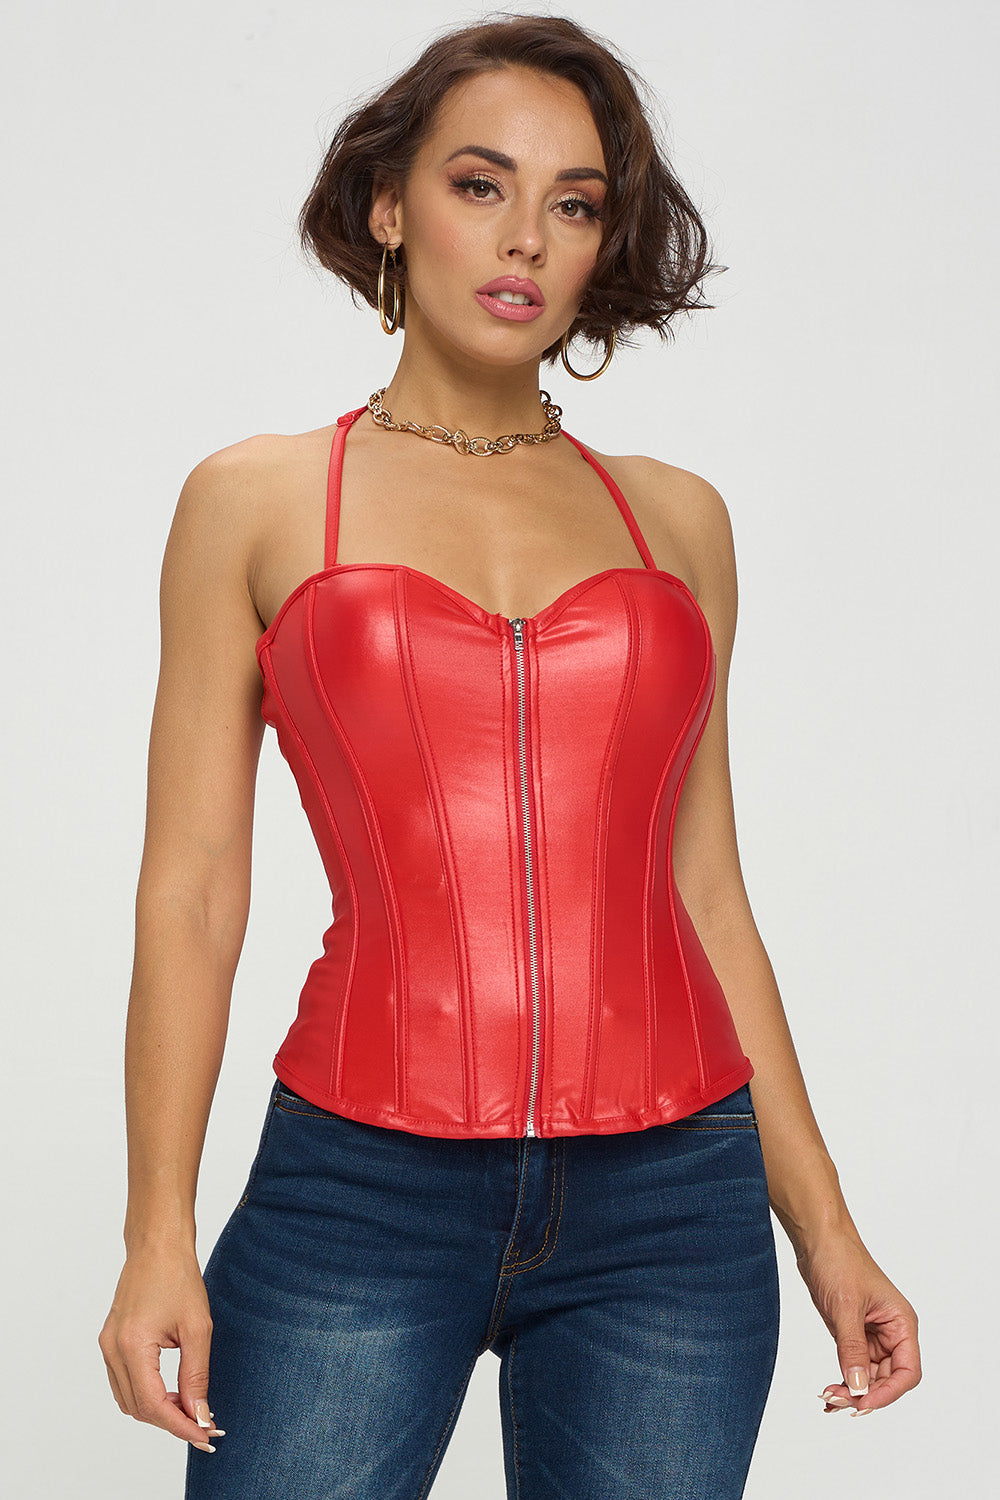 Zipper Front Corset Top, Zipper front corset top featuring …